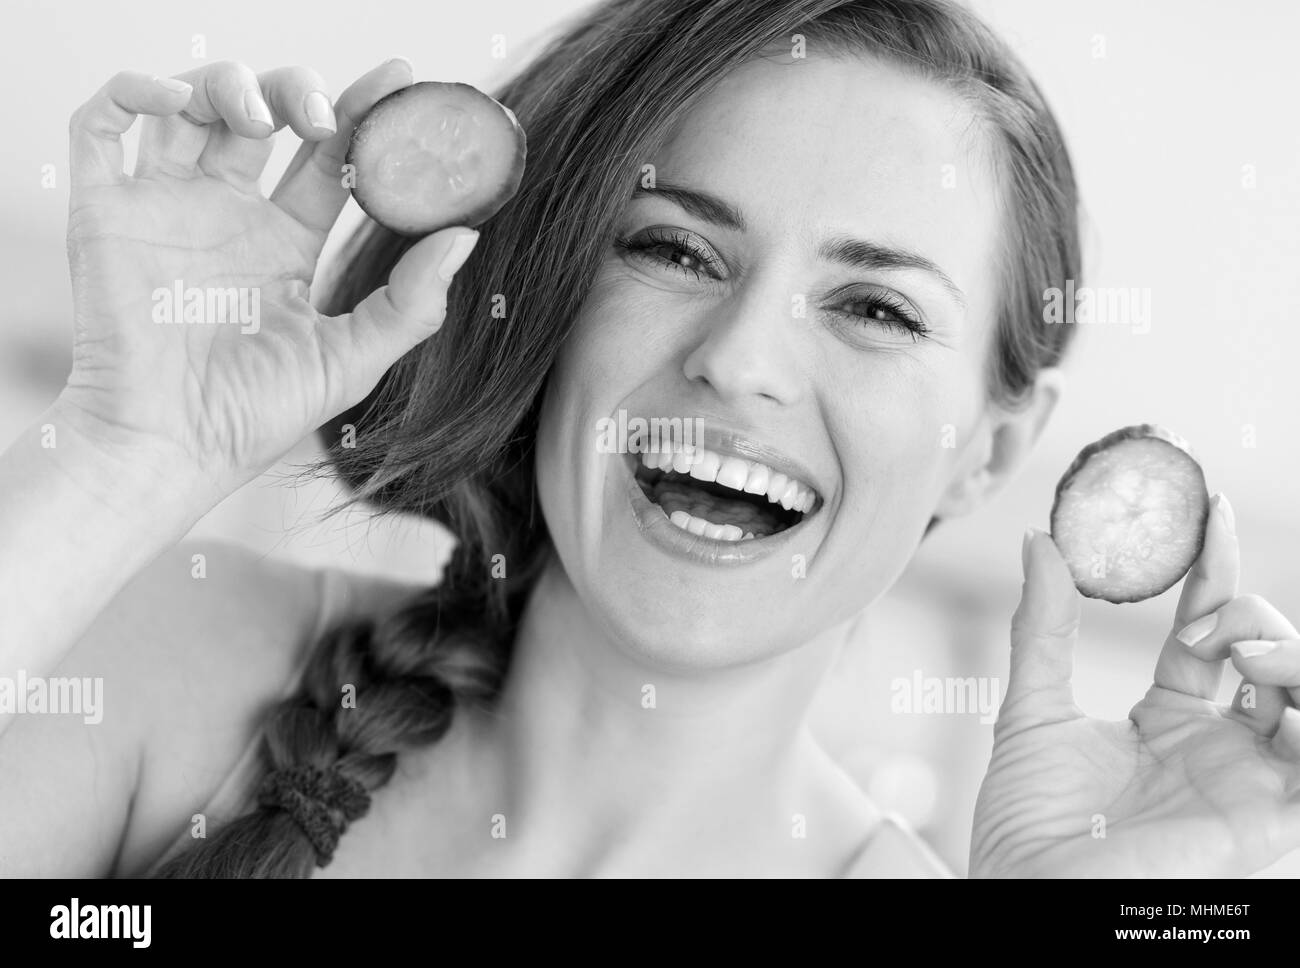 Smiling young woman showing slices of cucumber Stock Photo